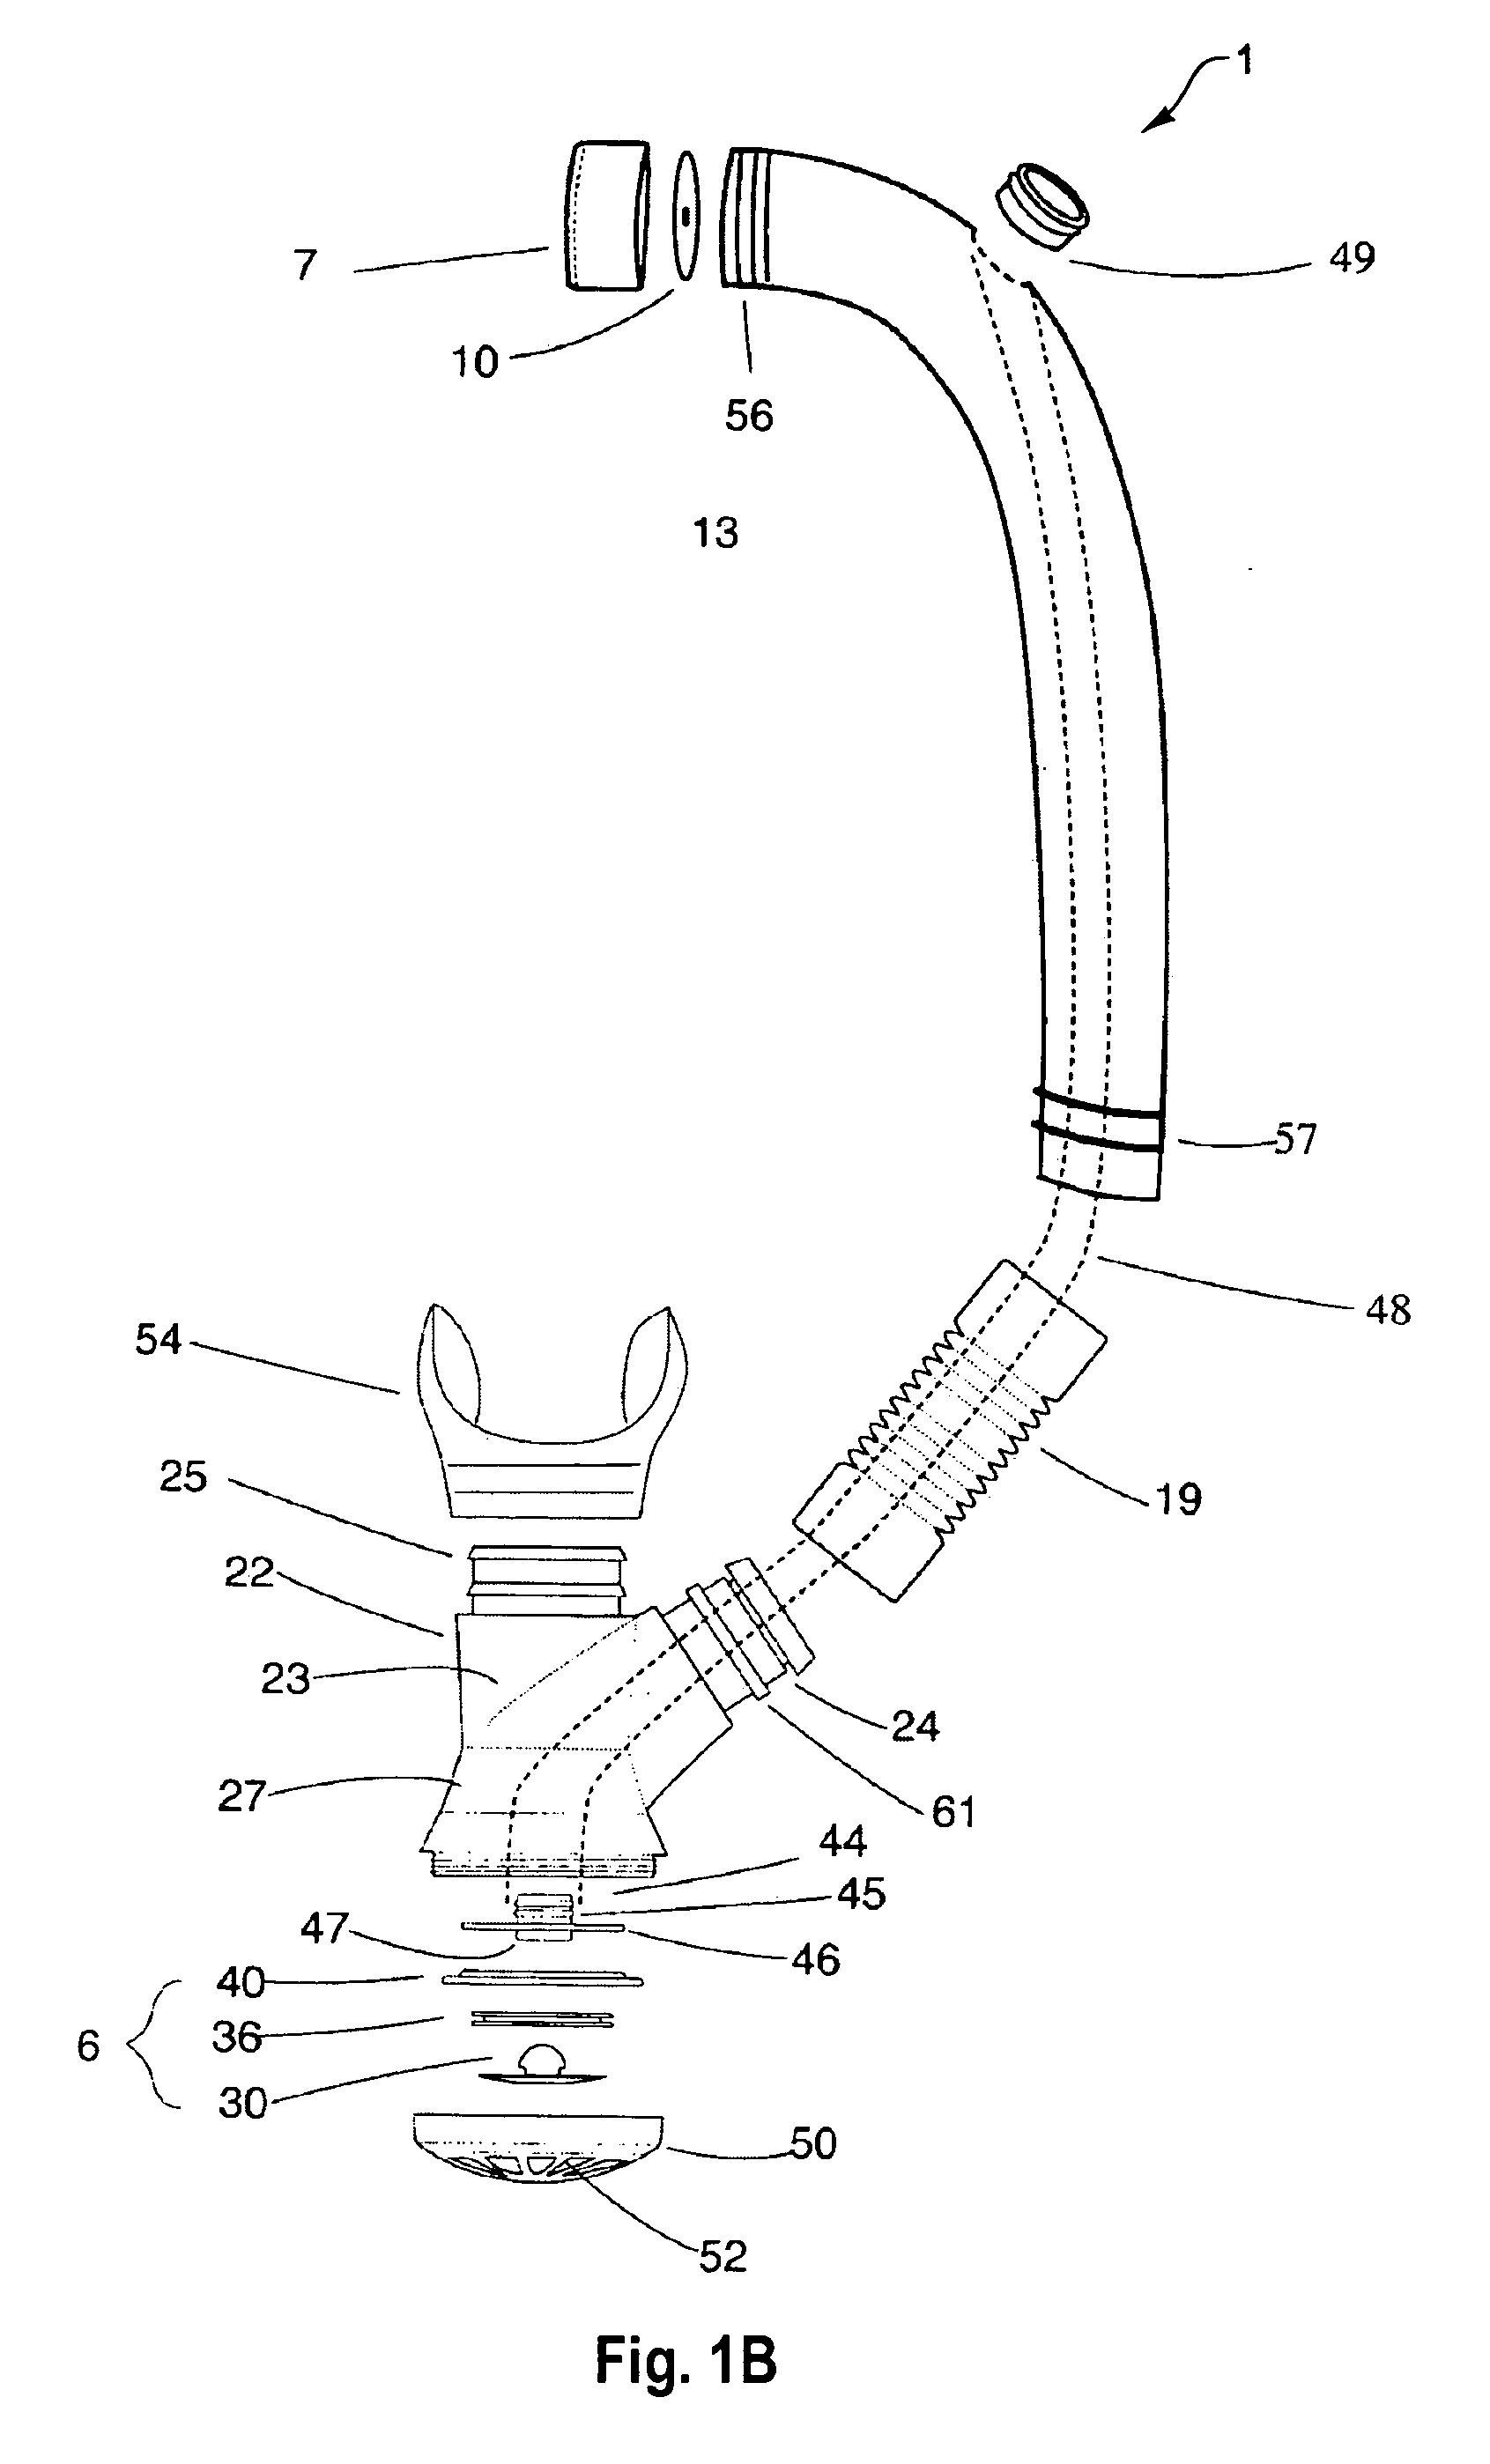 Exhalation valve for use in an underwater breathing device